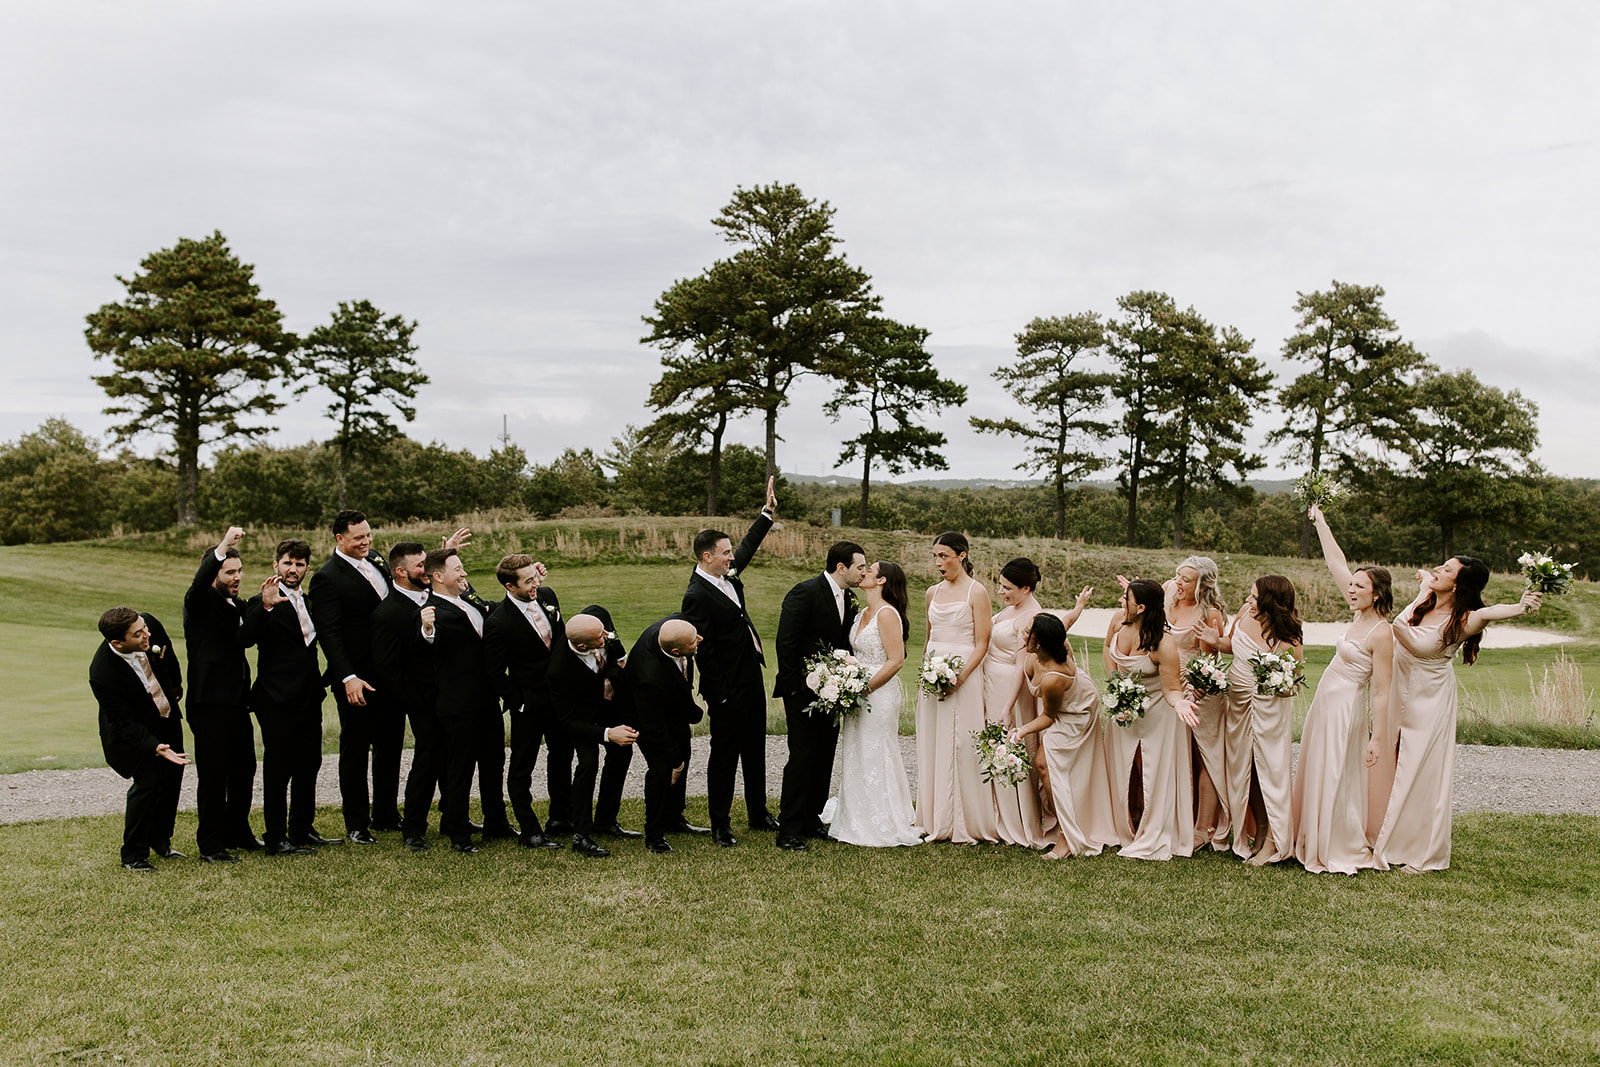 The wedding party poses together after the dreamy New England wedding